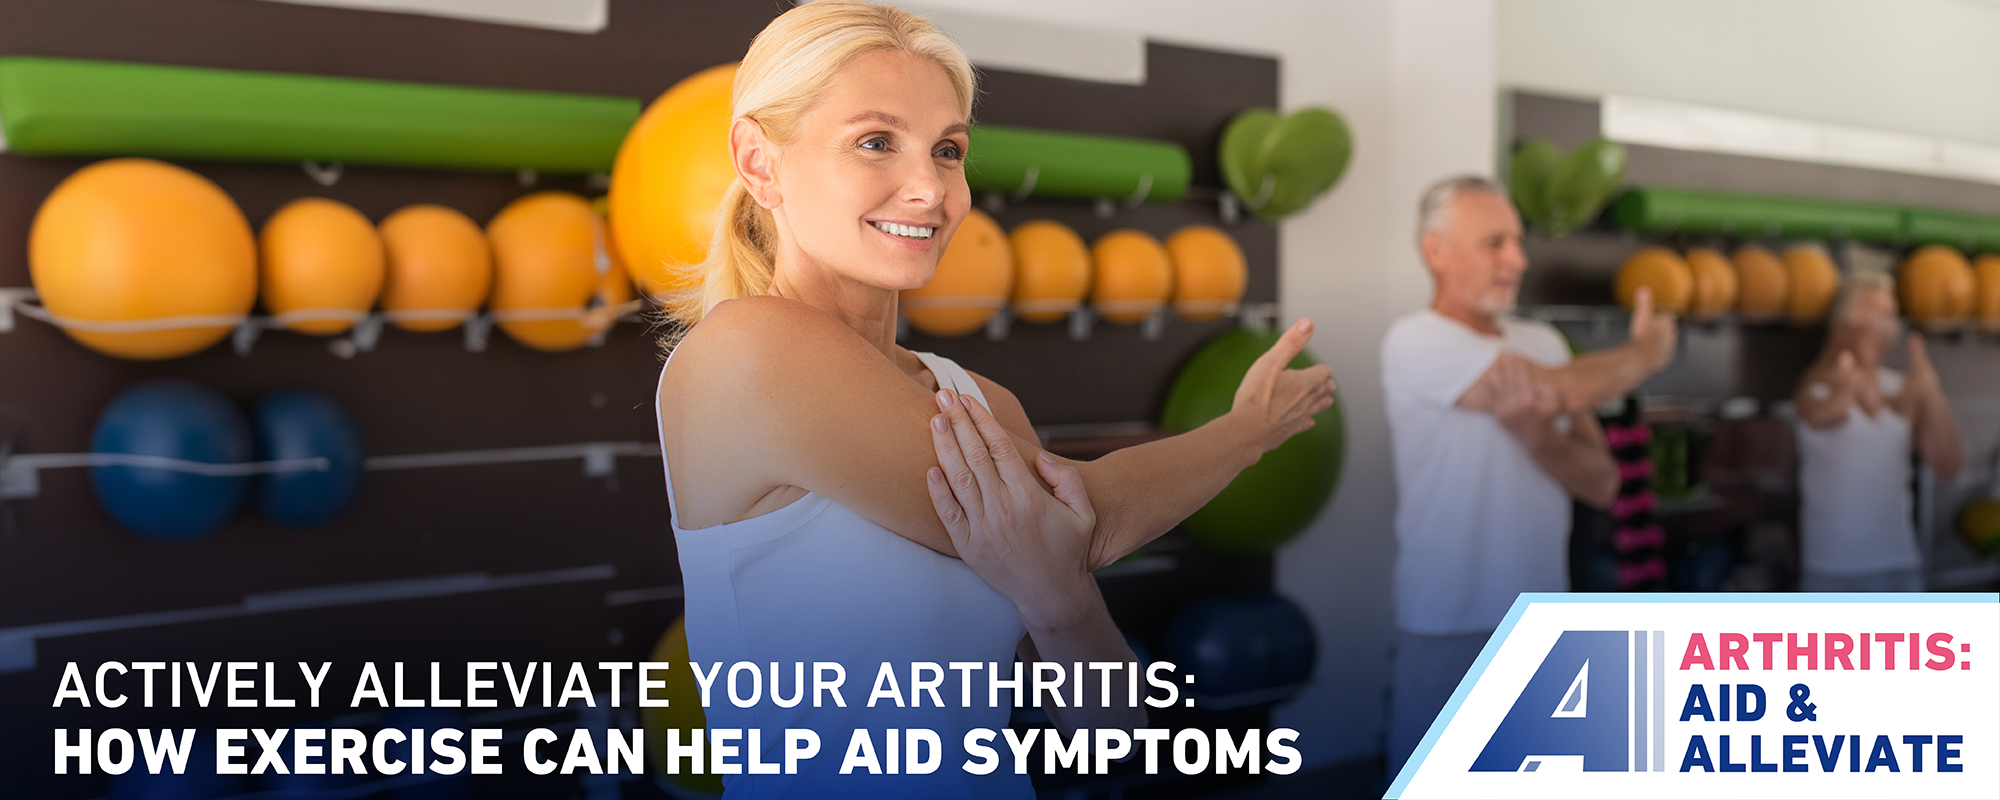 Actively alleviate your arthritis: How exercise can help aid osteoarthritis symptoms